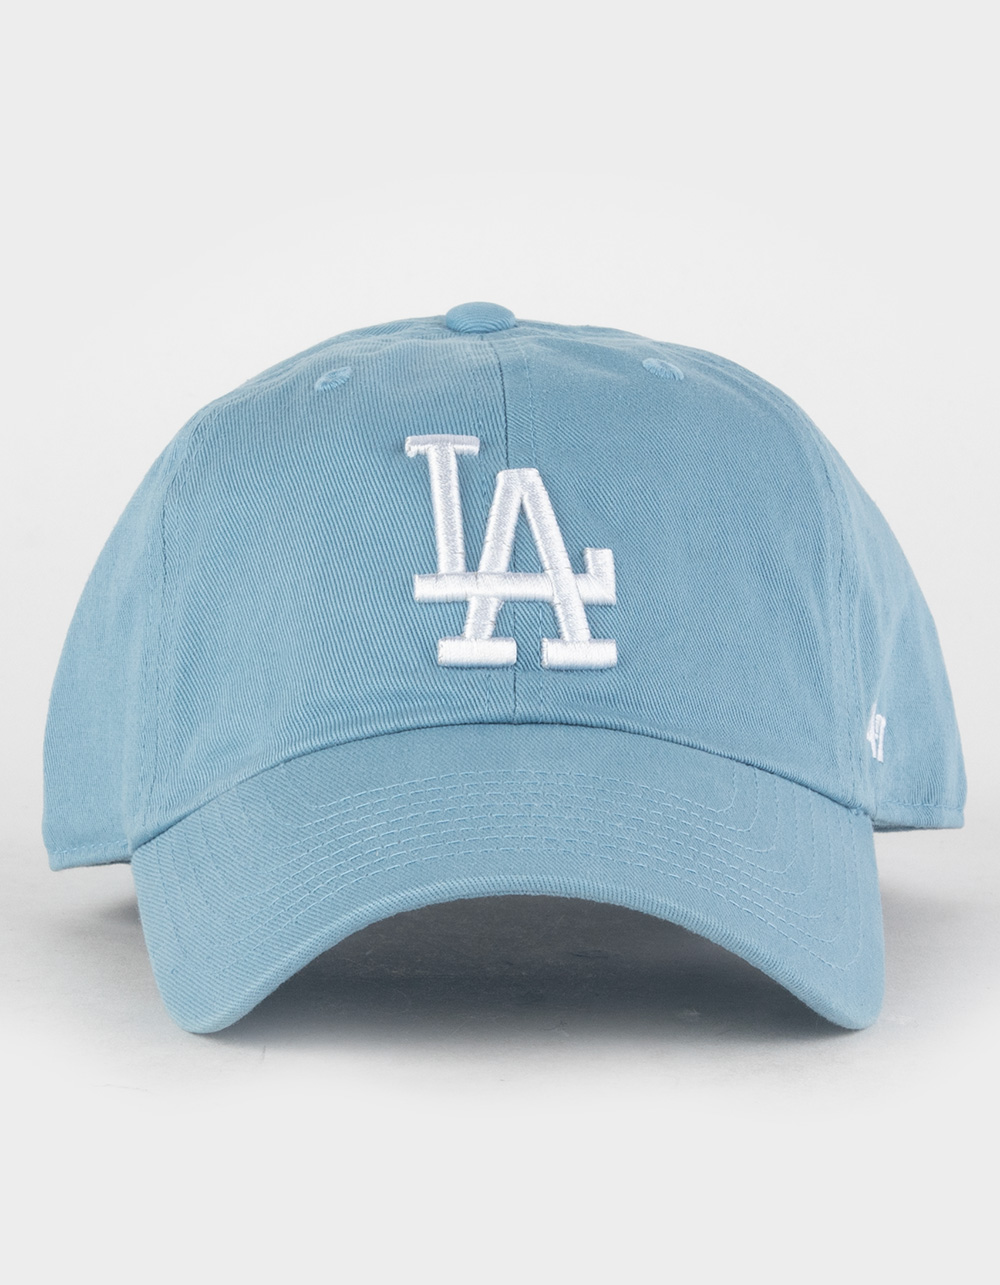 Los Angeles Dodgers Columbia Blue '47 Brand Clean Up